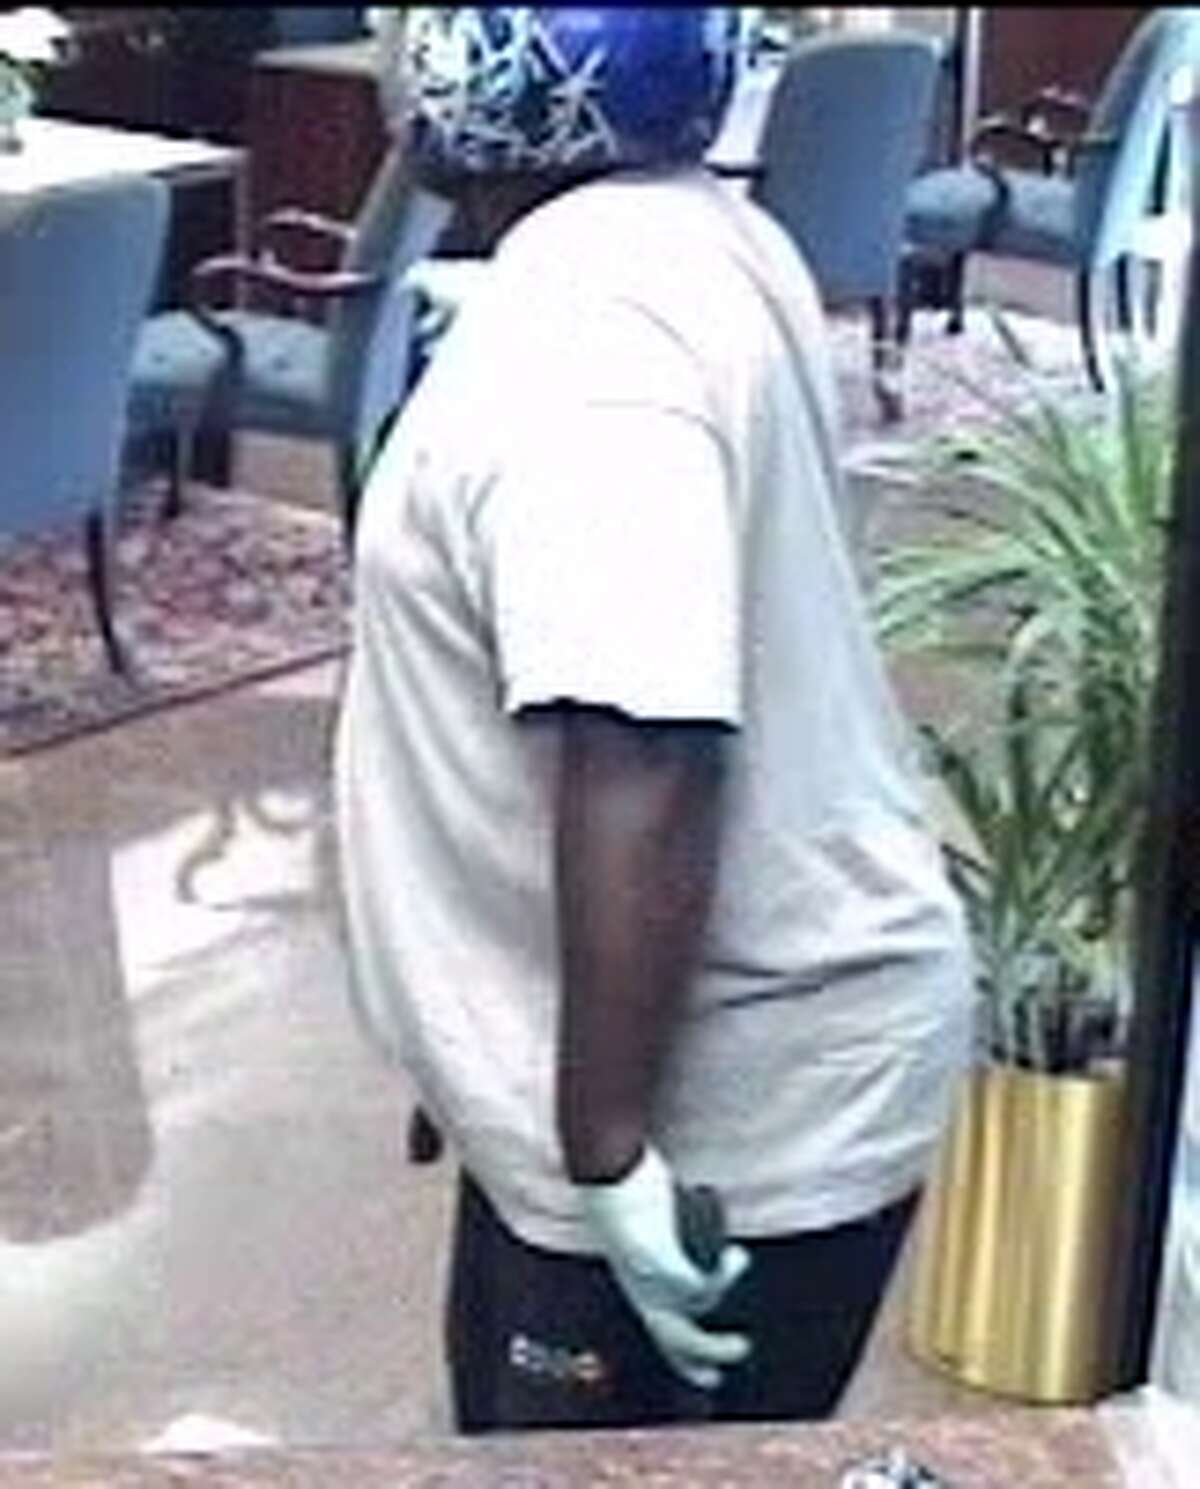 A surveillance photo of the Thursday morning robbery at an International Bank of Commerce branch in Montrose. One of the suspects is shown wearing a motorcycle helmet.